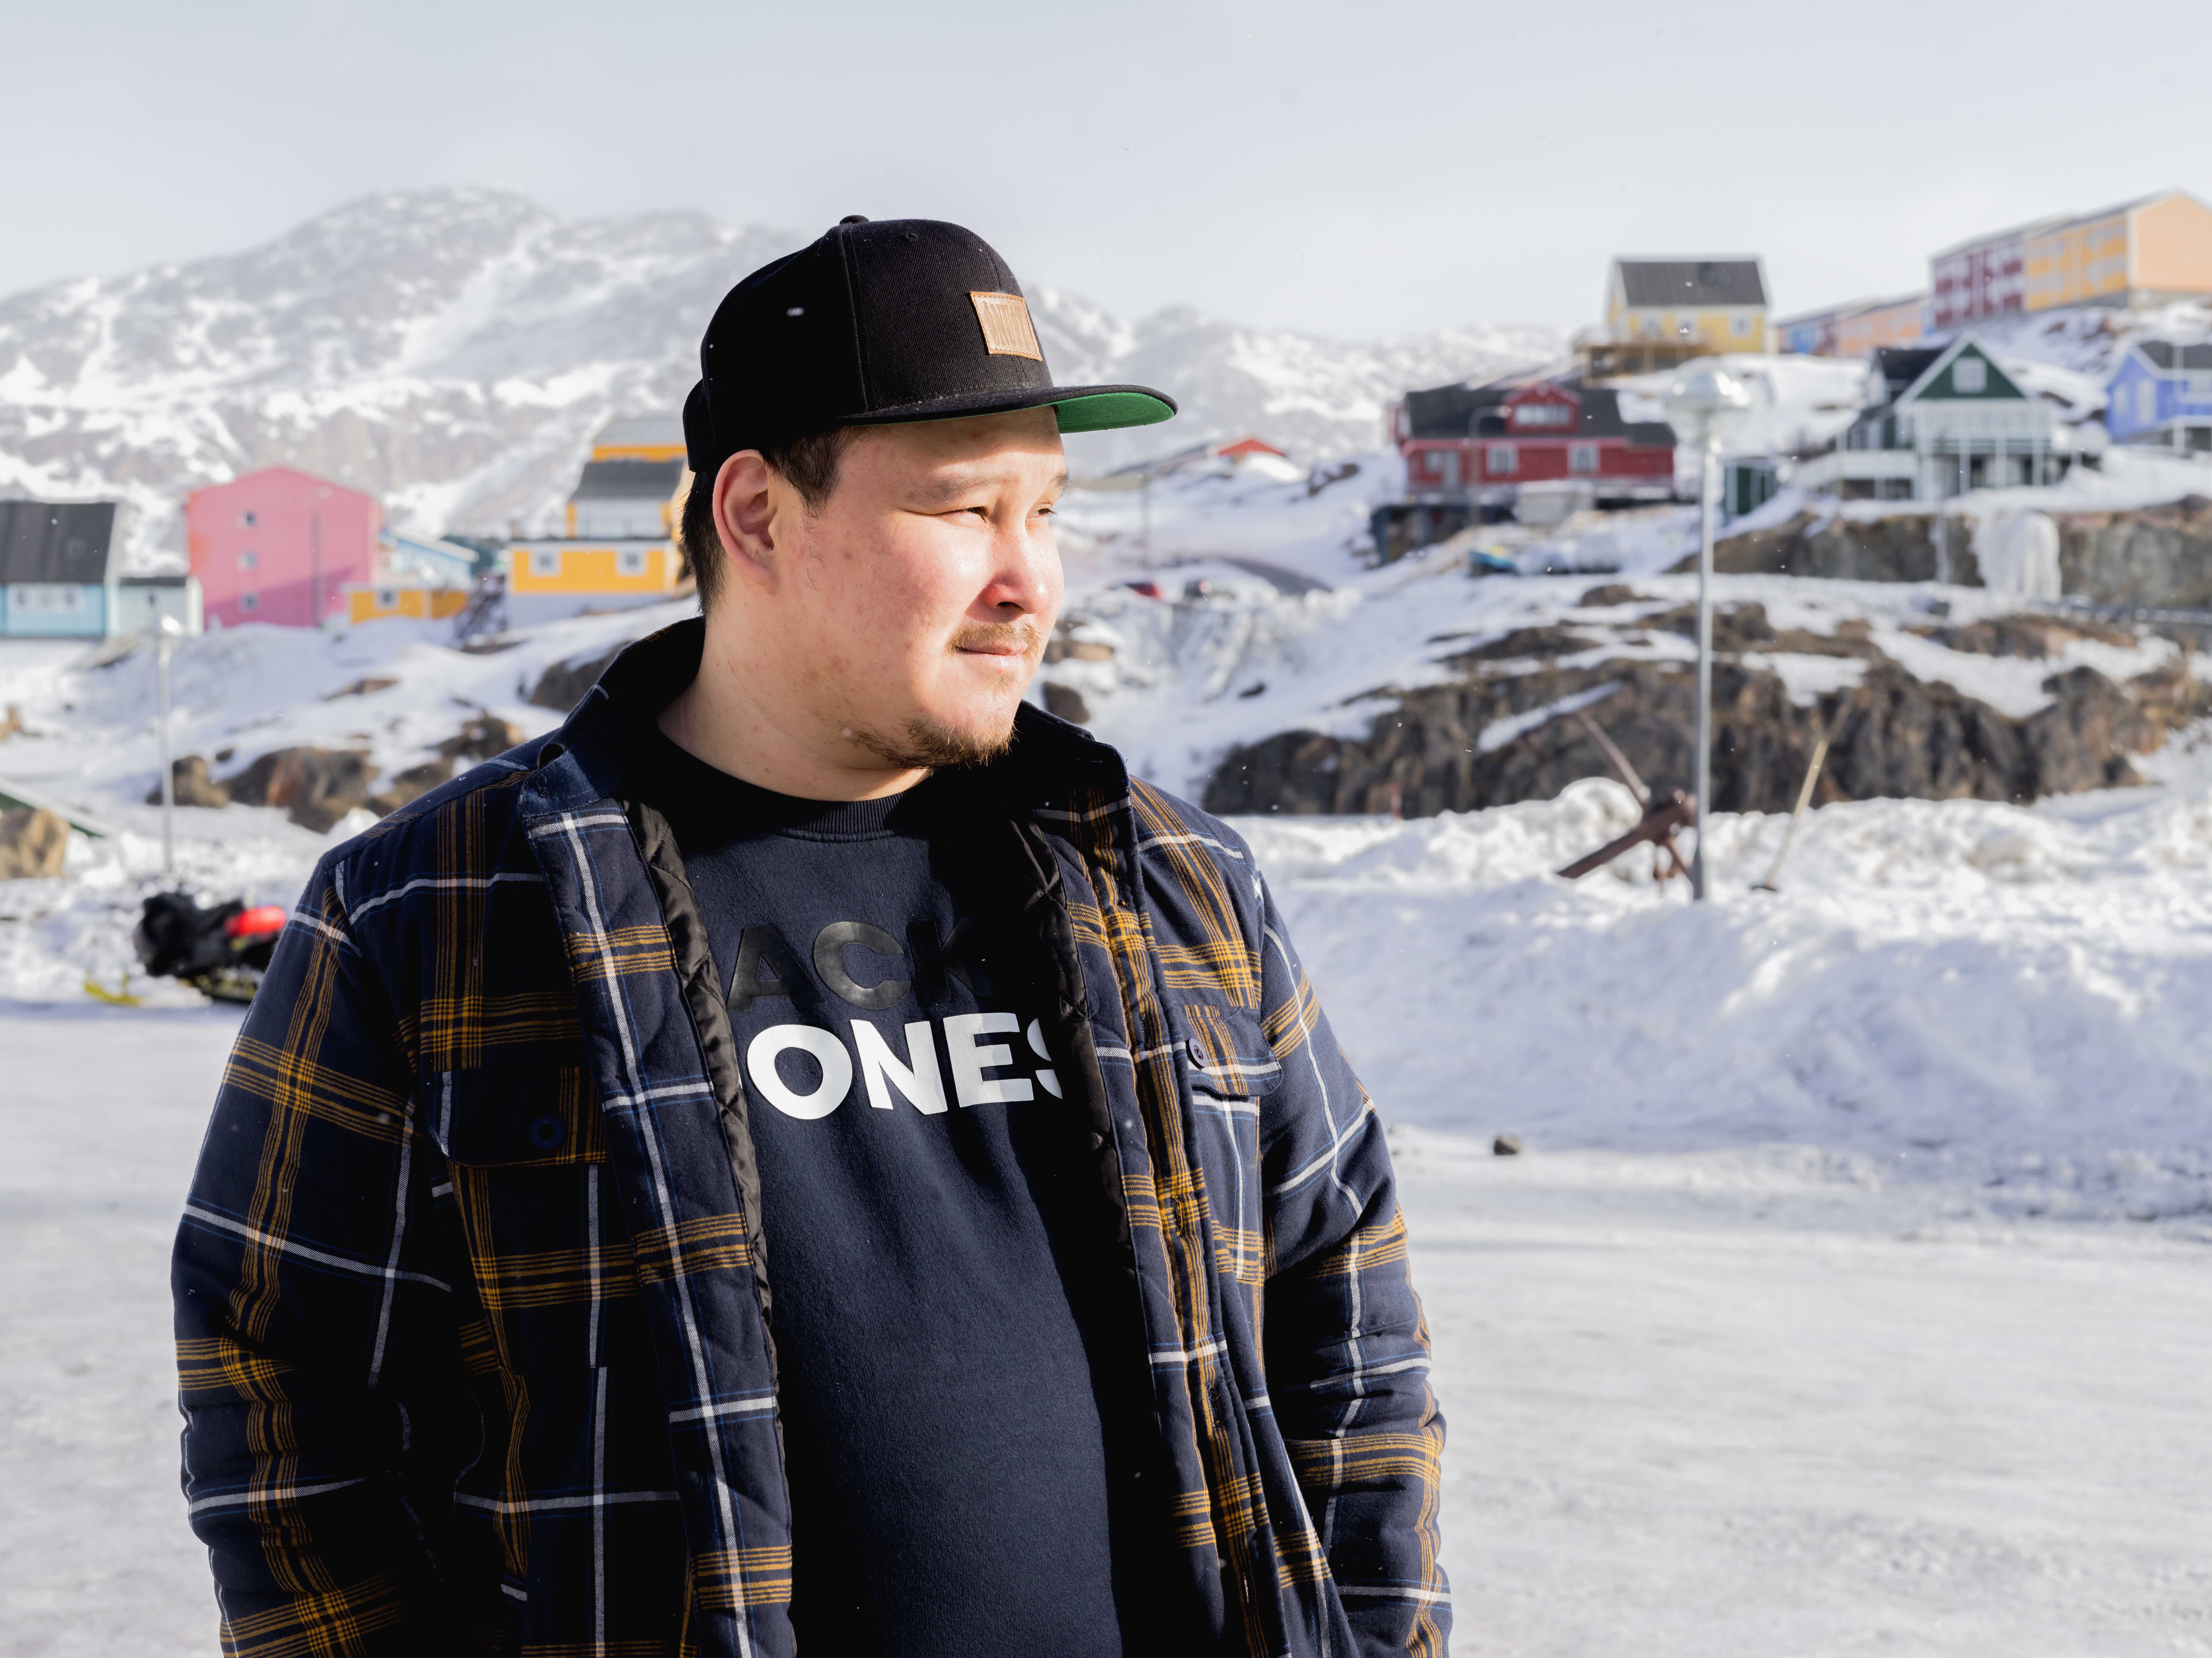 A man in a black cap and blue and orange plaid jacket looks to the right of the frame. Behind him. a snow covered town of colorful buildings is visible.